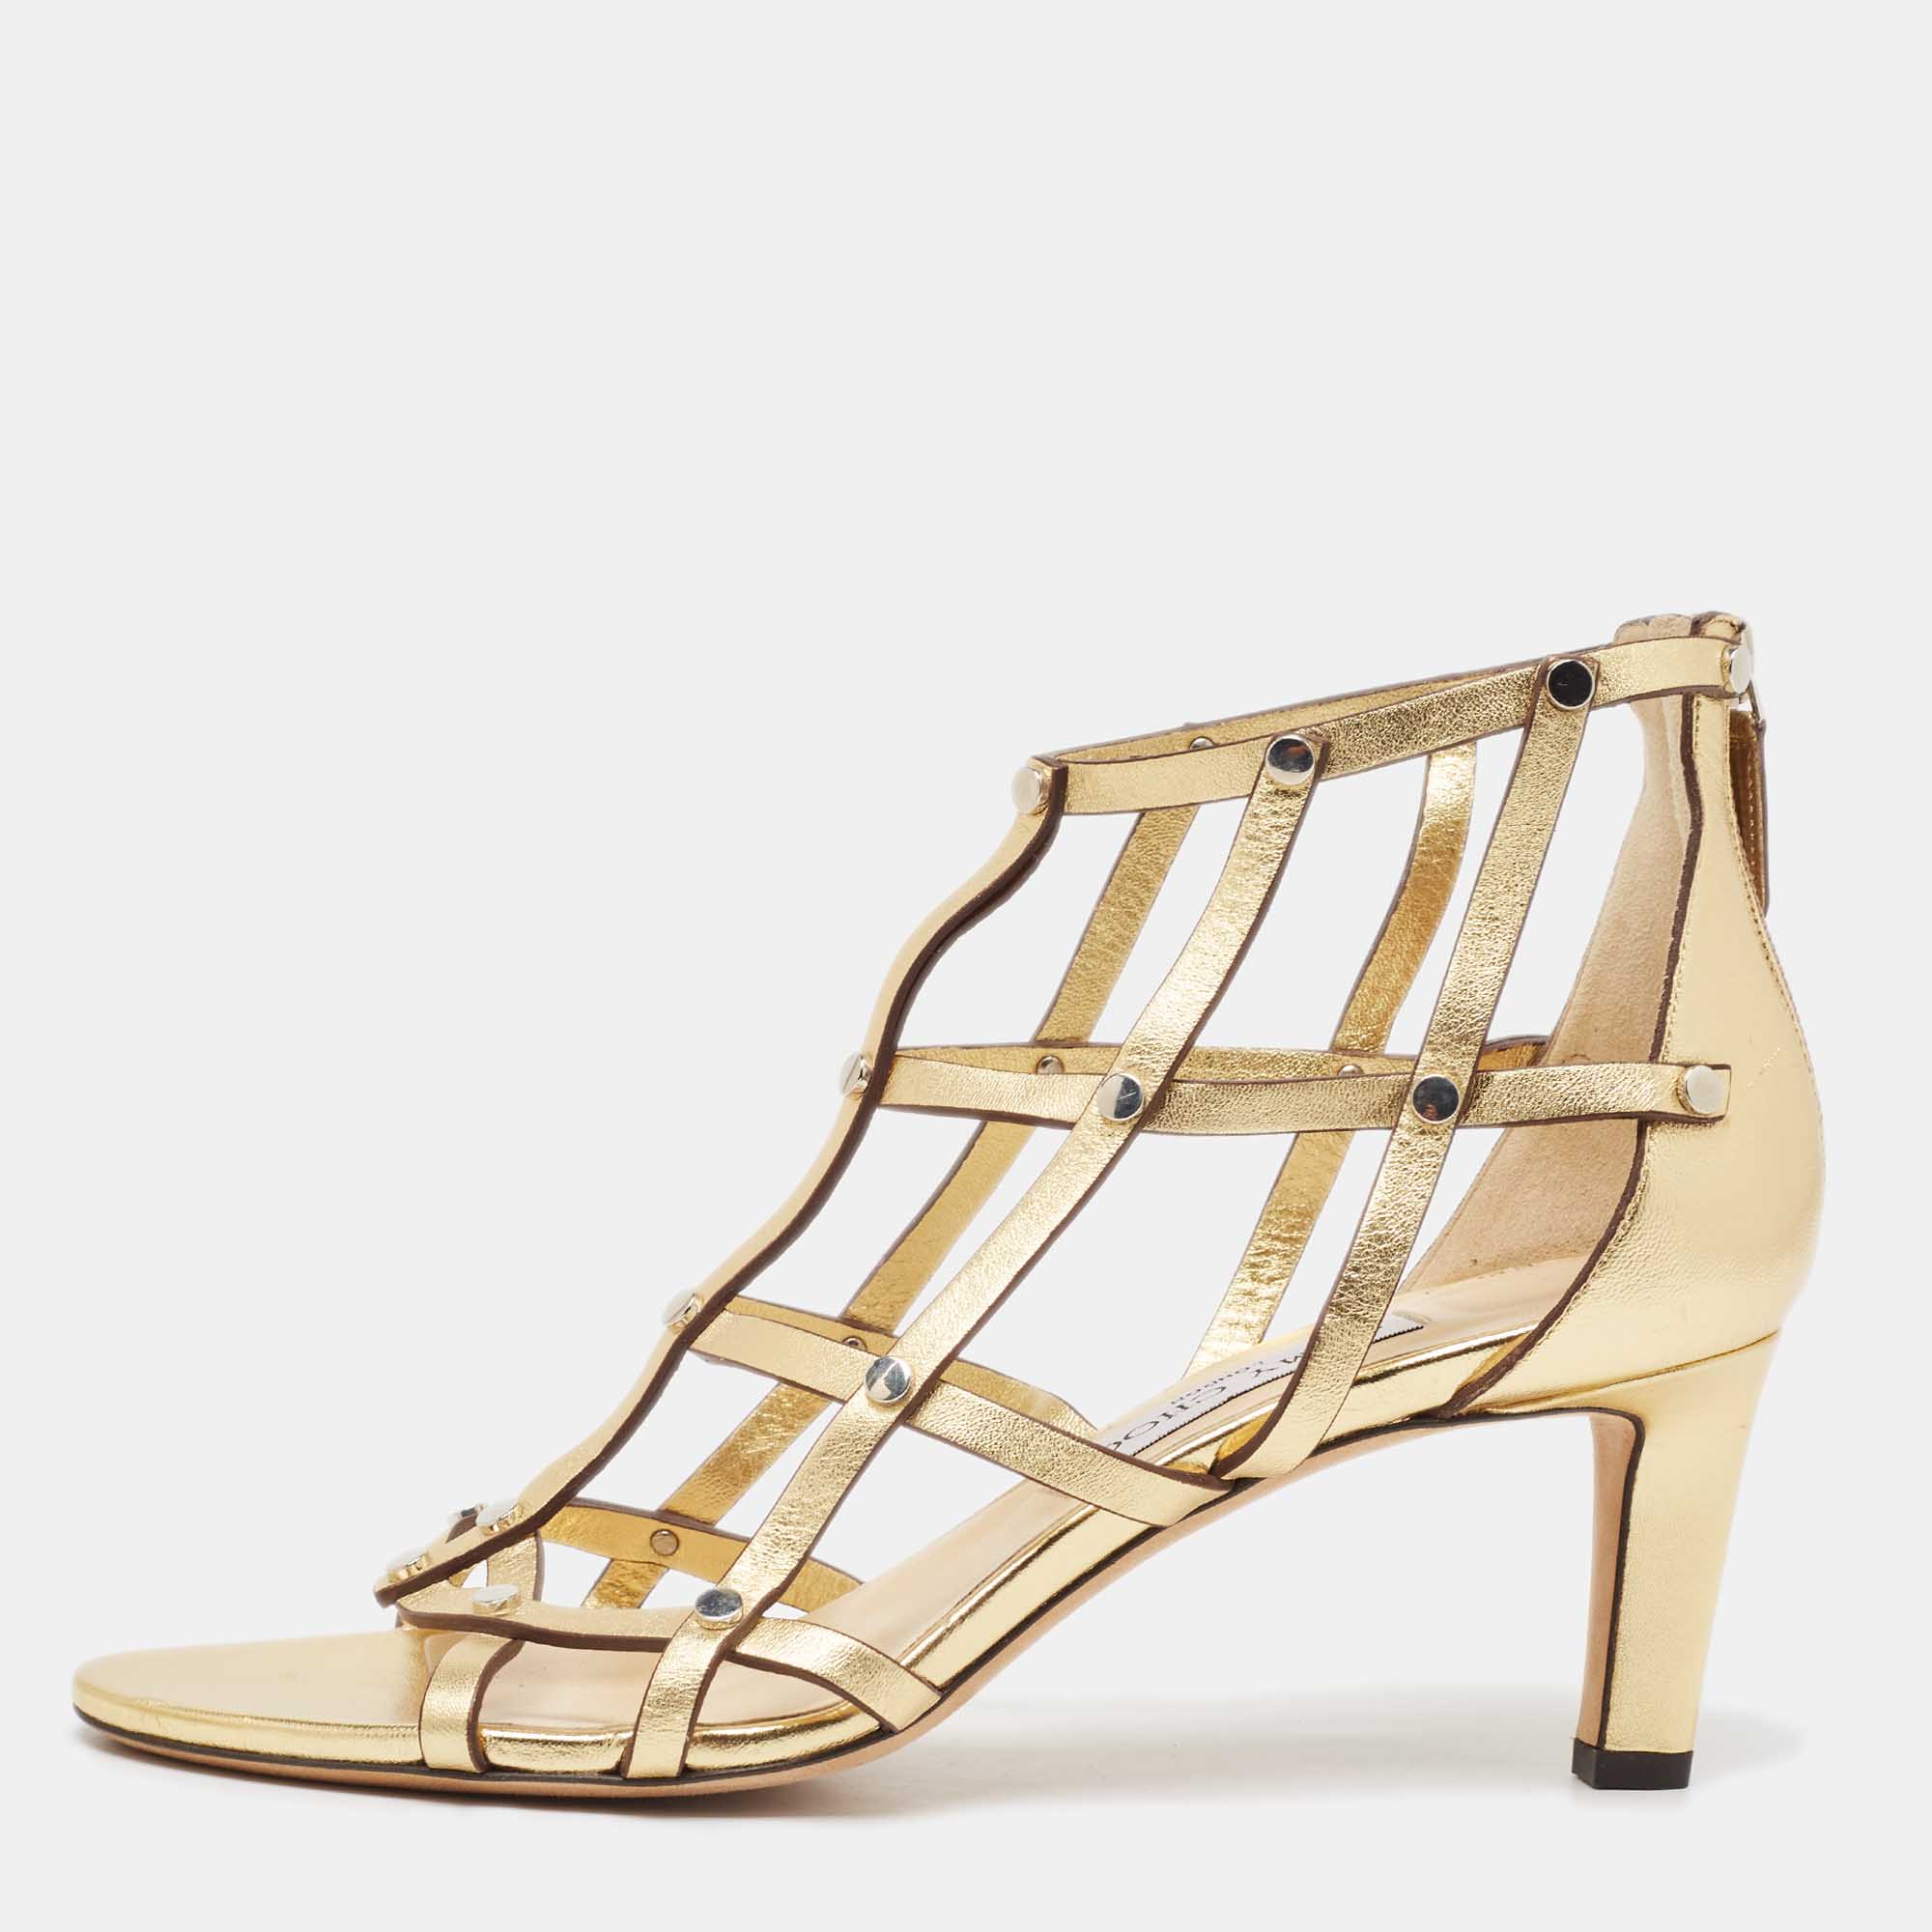 Jimmy choo gold leather strappy sandals size 38.5